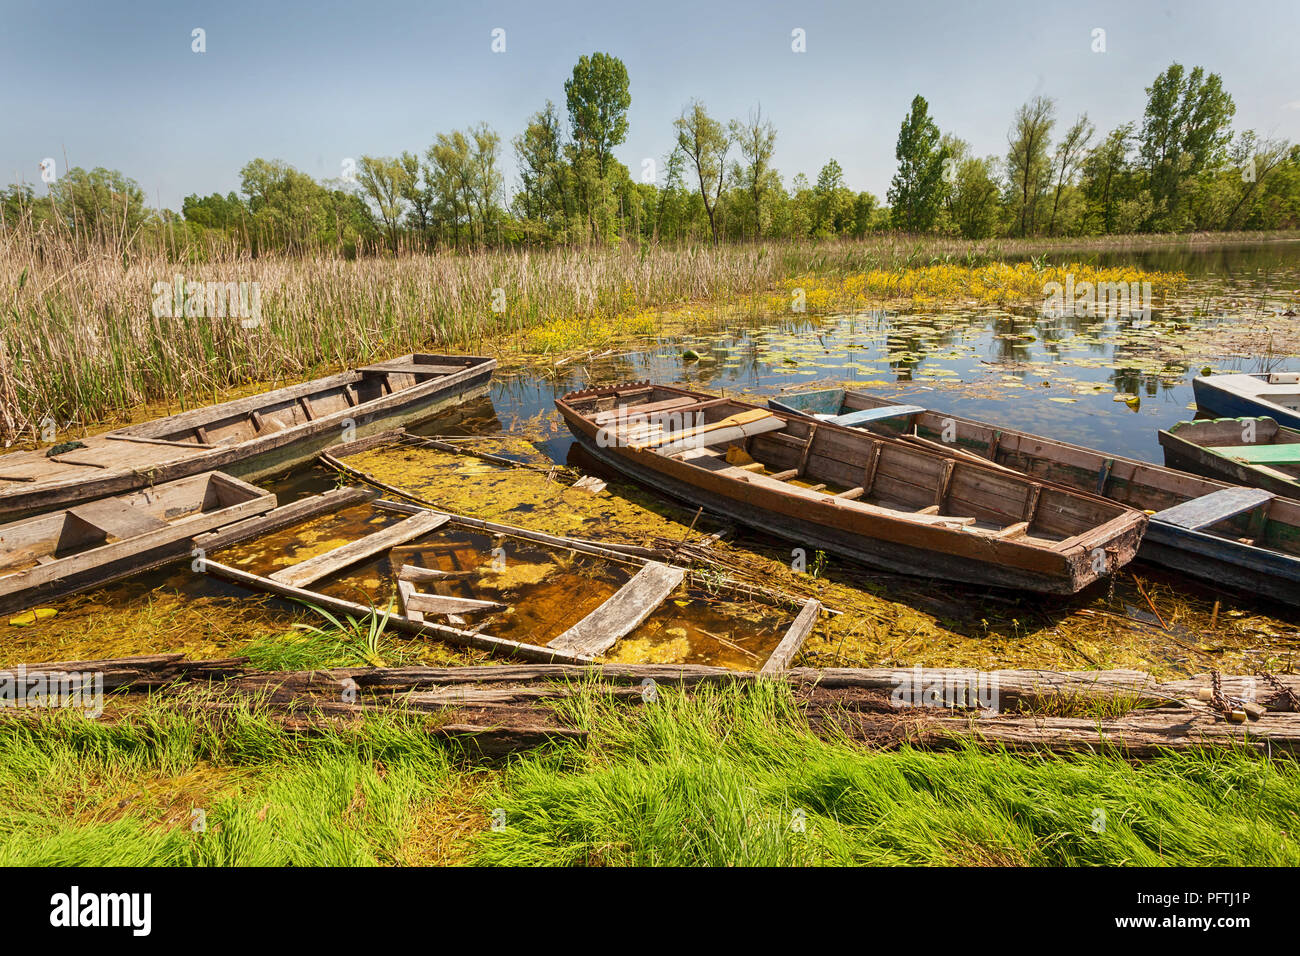 Abandoned boats in the swamp Stock Photo